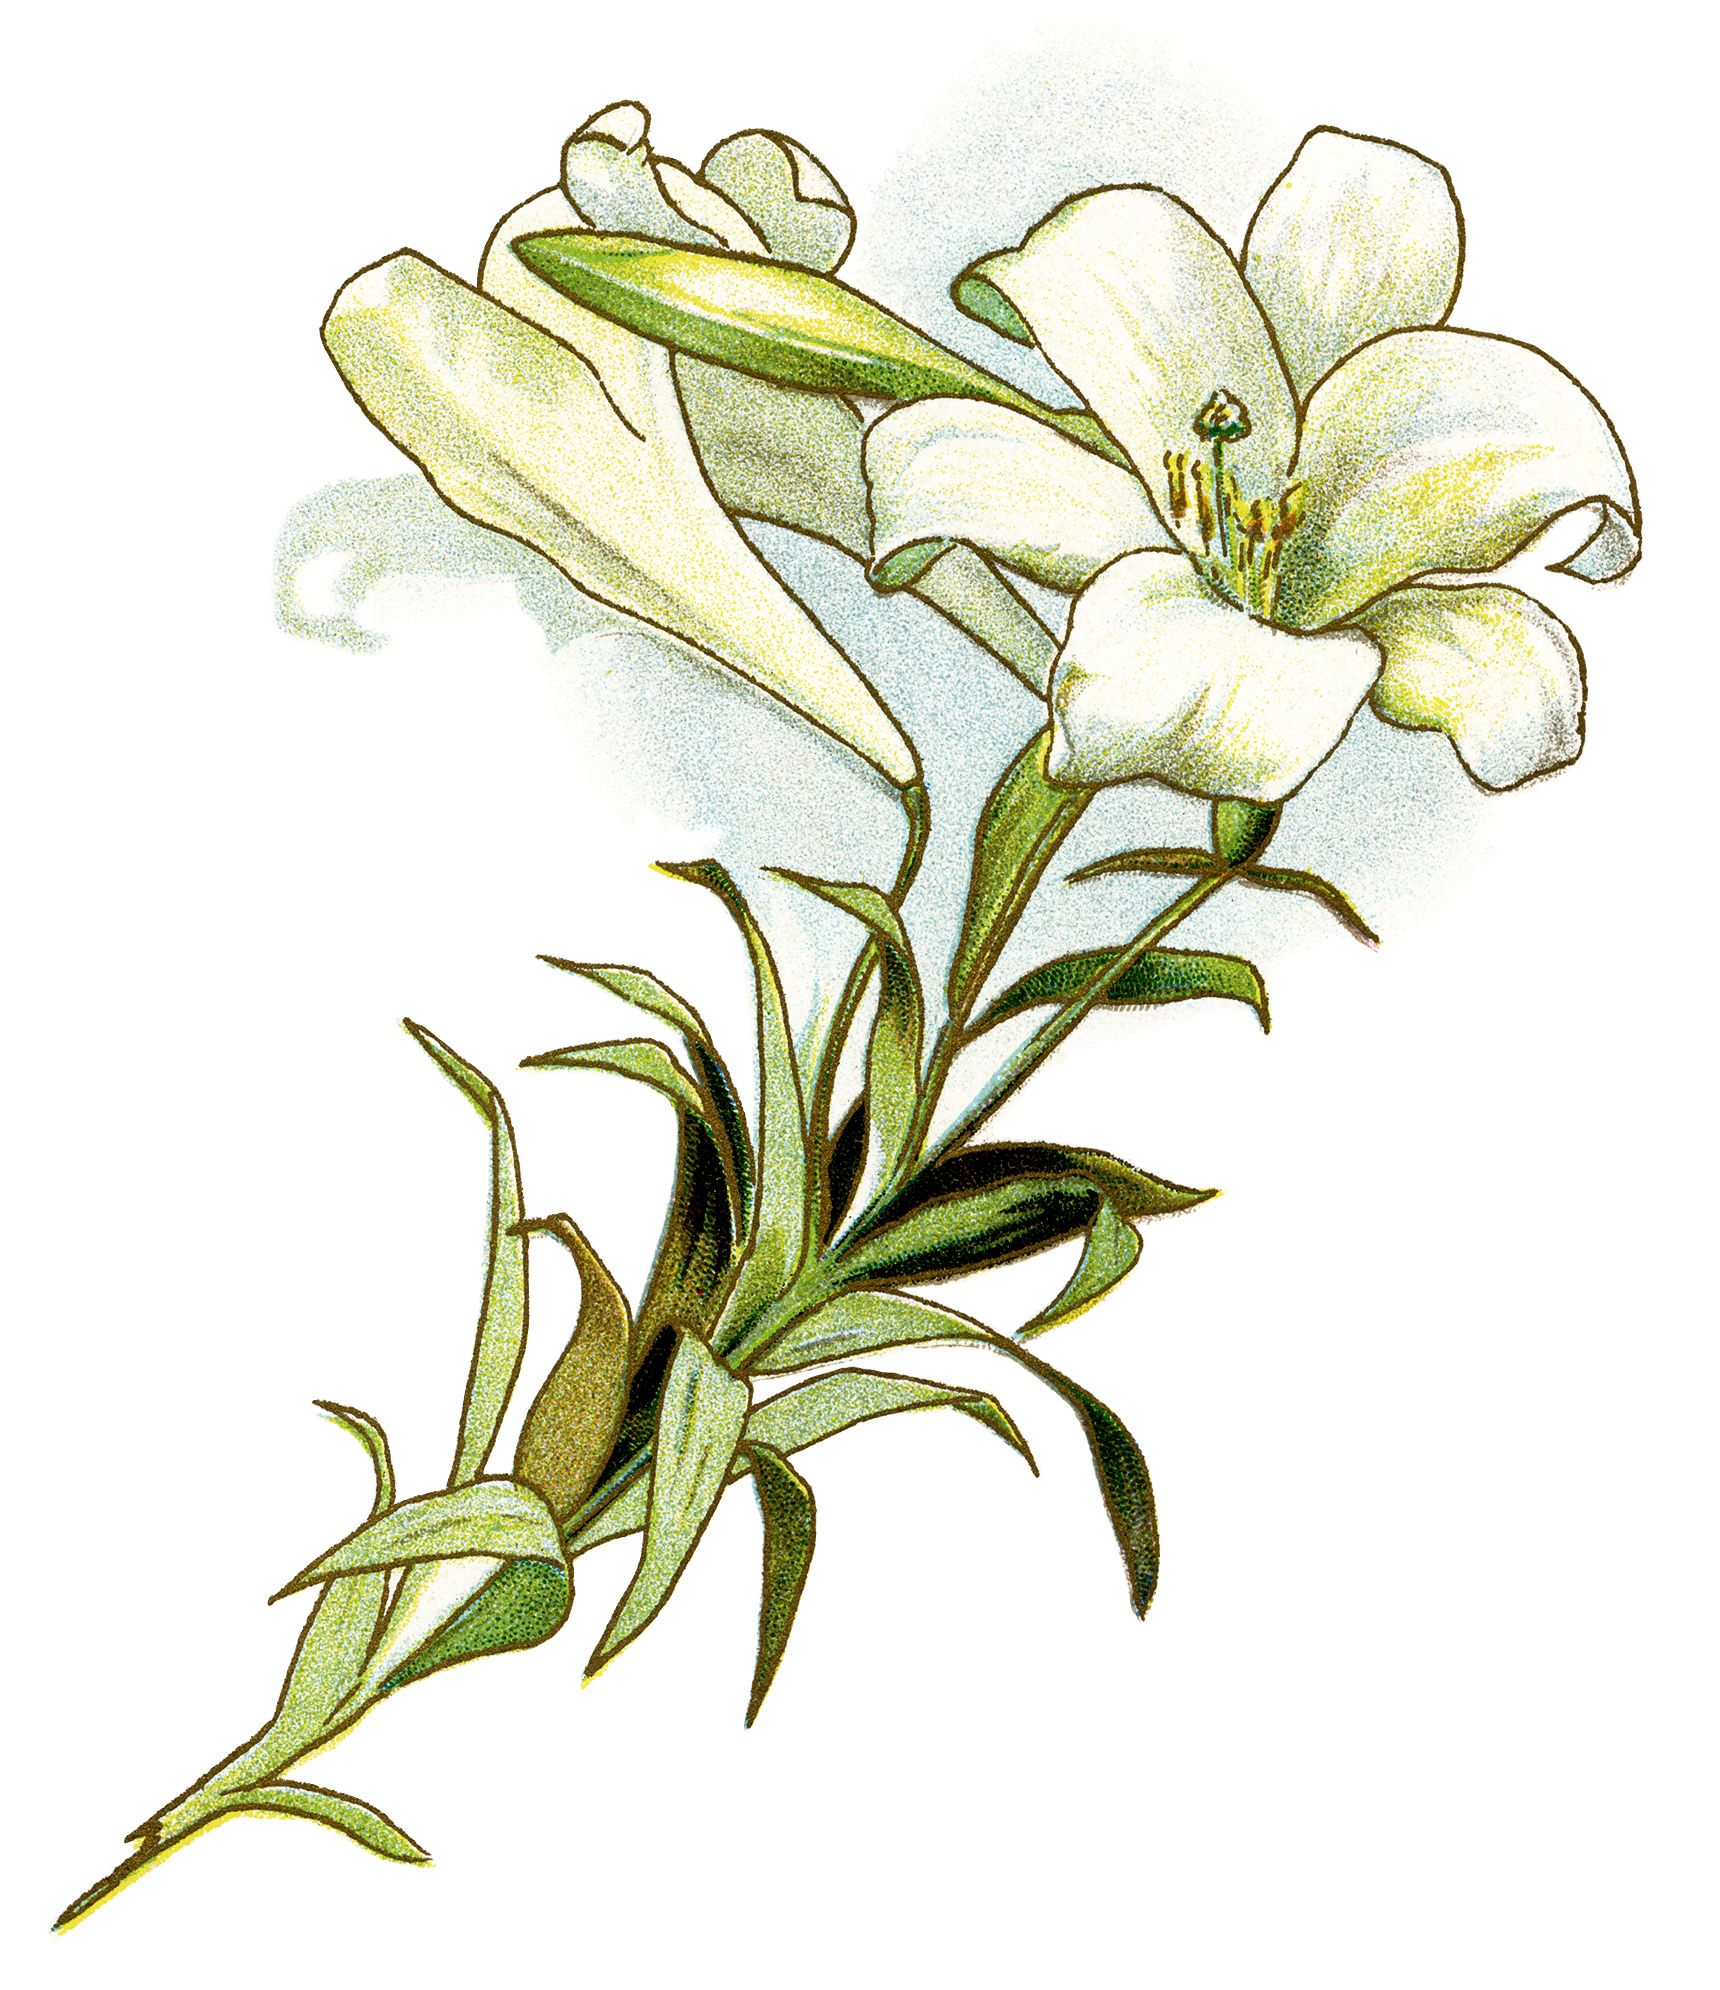 This Beautiful Vintage Image Of A White Lily Is From A Book Of Poetry